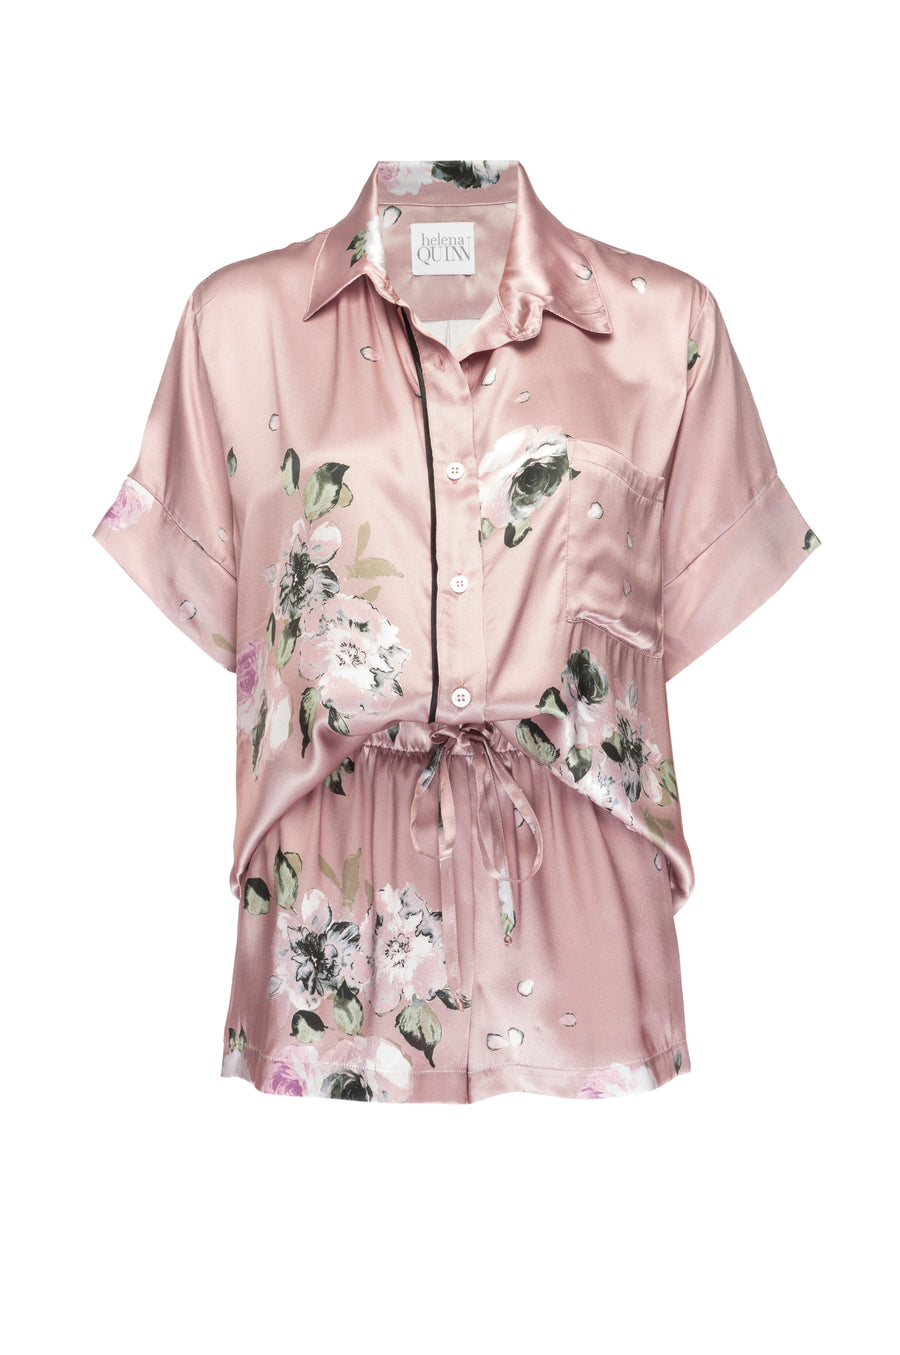 Silk Charmeuse Short Sleeved Top: Champagne Floral Print